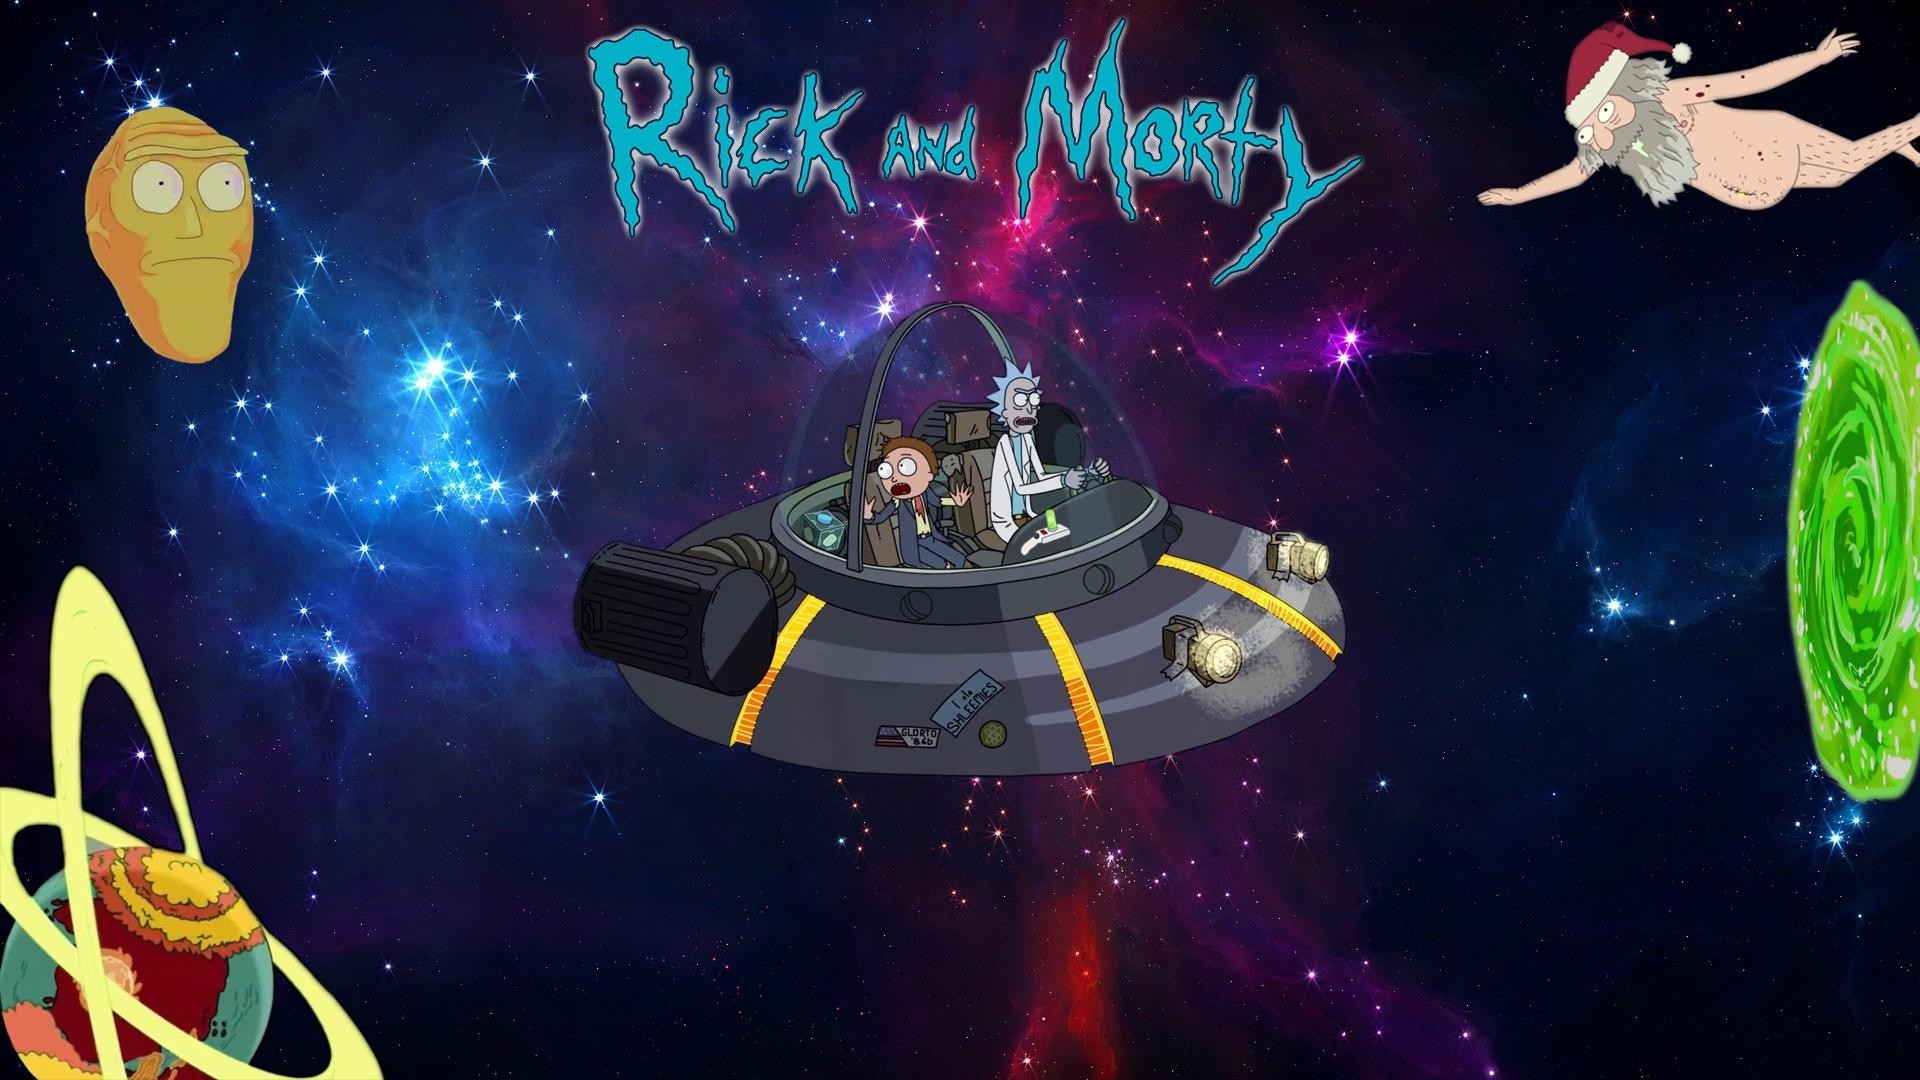 Rick and Morty Desktop Backgrounds HD with image resolution 1920x1080 pixel. You can use this wallpaper as background for your desktop Computer Screensavers, Android or iPhone smartphones